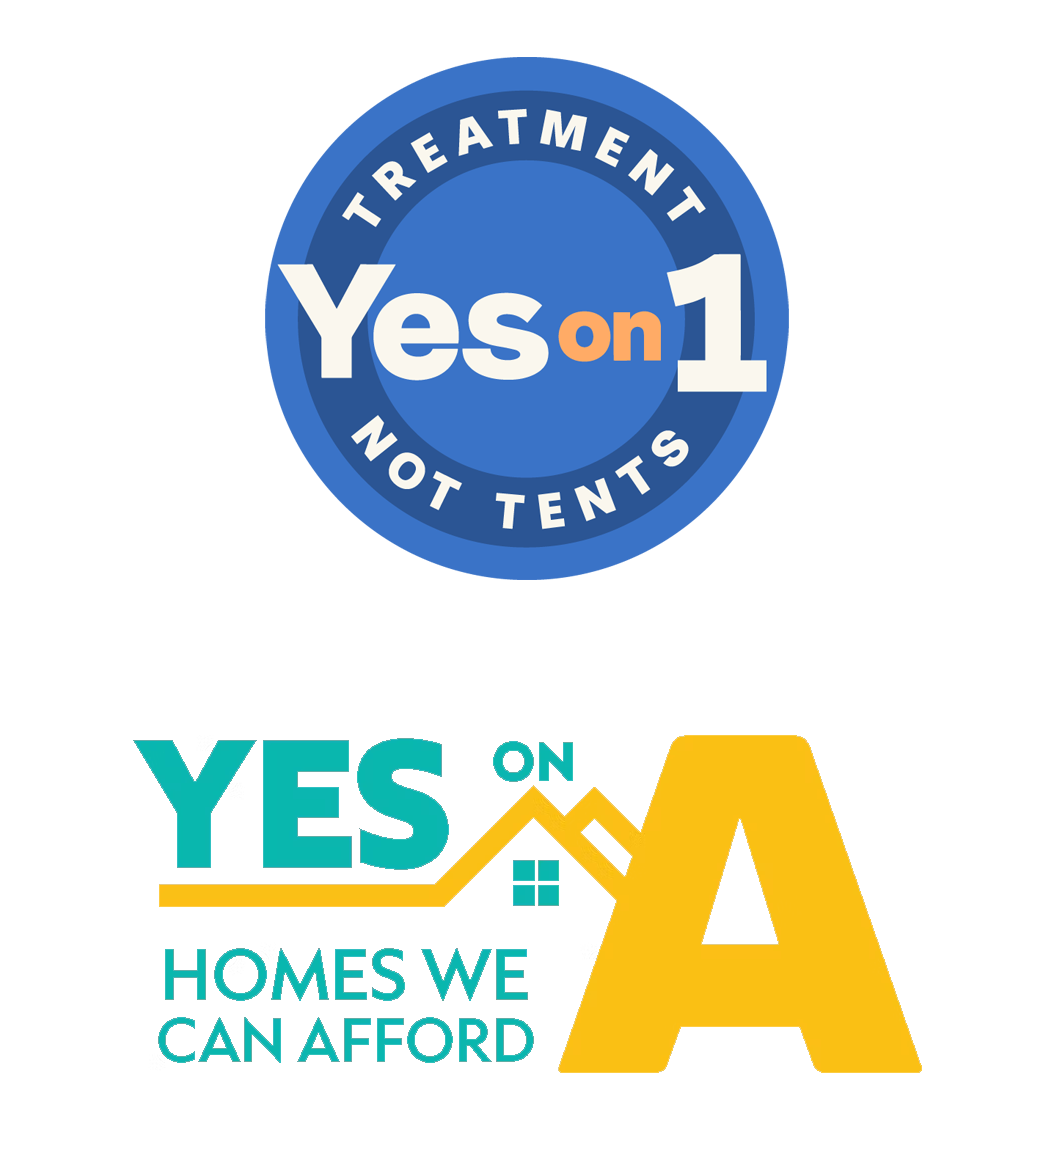 Logos for prop 1 and Prop A